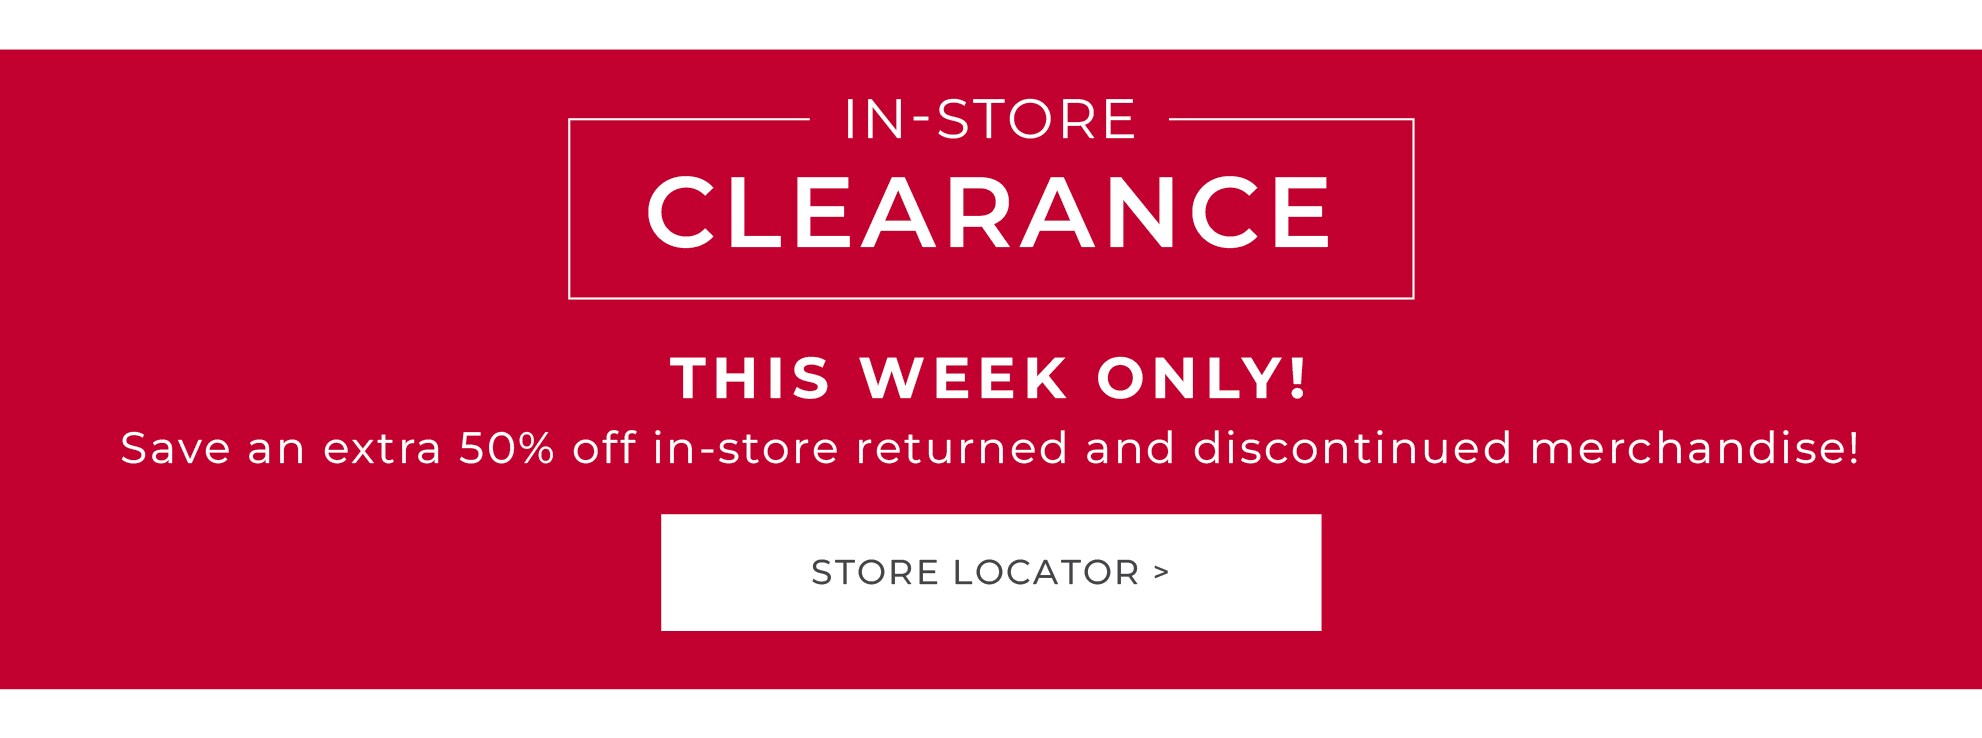 Visit a showroom near you for clearance deals.